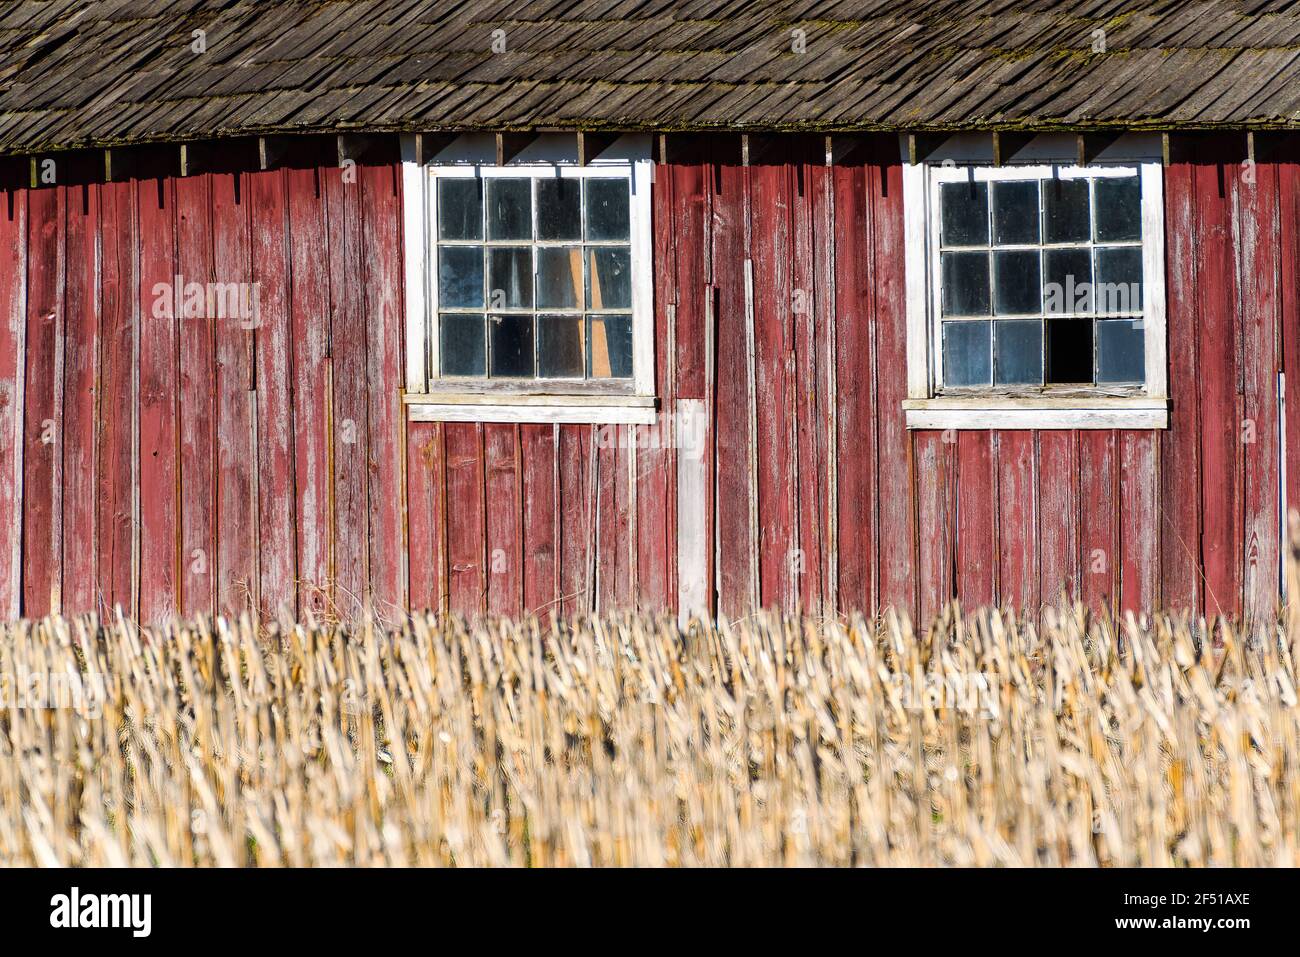 Pair of white windows in an old red barn behind corn stalks with a wooden roof above Stock Photo